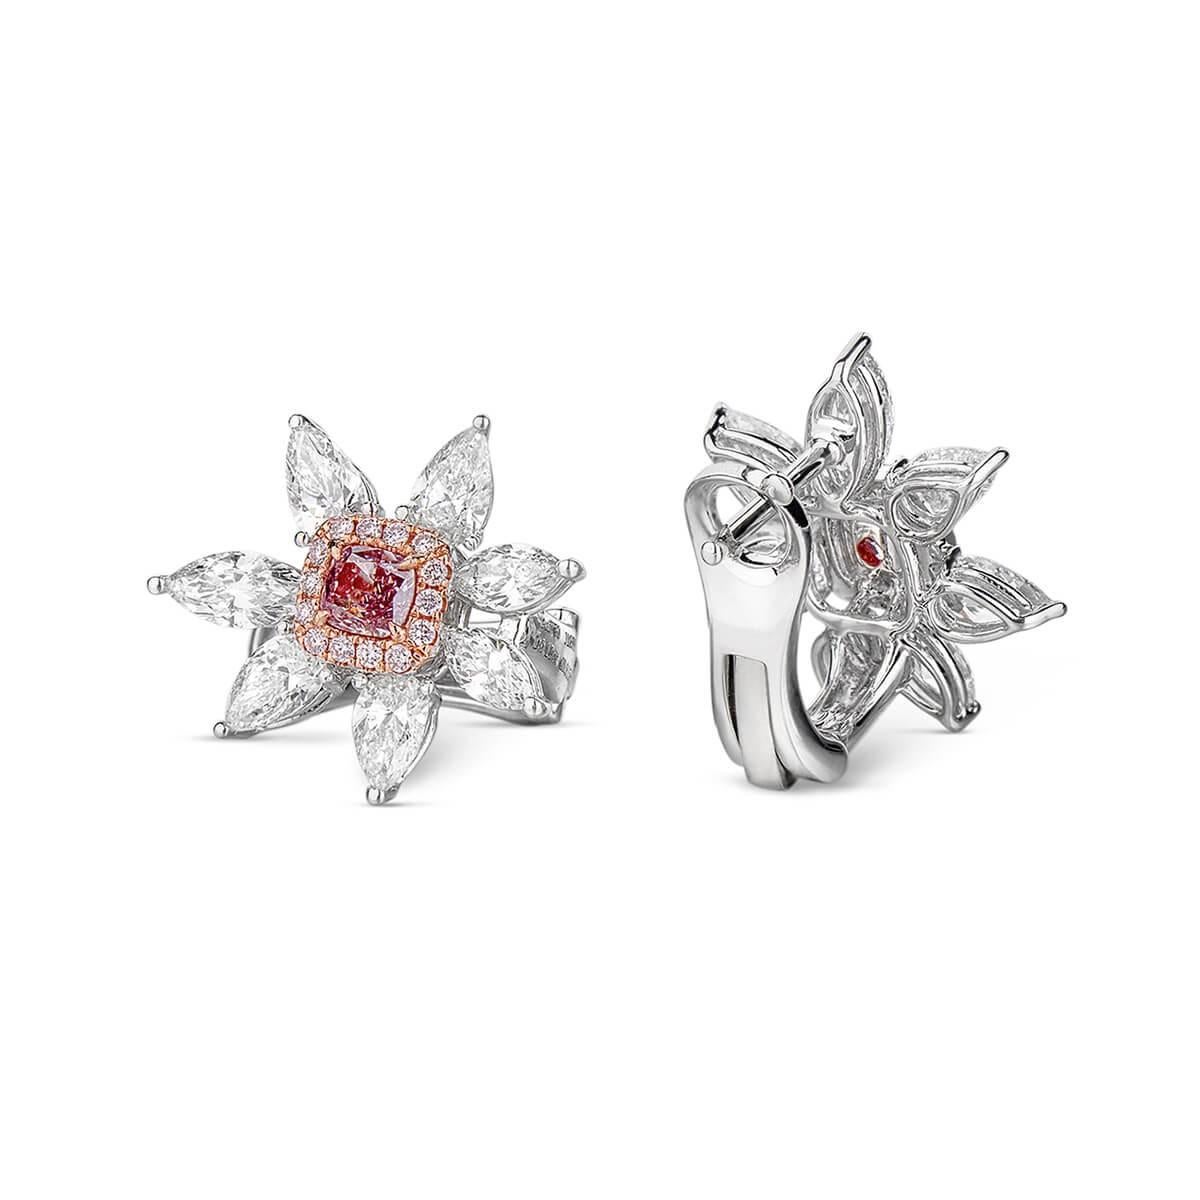 WHITE GOLD FLOWER FANCY PINK AND WHITE DIAMOND EARRINGS - 2.19 CT


Set in 18K White Gold


Total fancy pink diamond weight: 0.37 ct
[ 2 diamonds ]
Color: Fancy purple pink
Clarity: SI2

Total white diamond weight: 1.66 ct
[ 14 diamonds ]
Color: